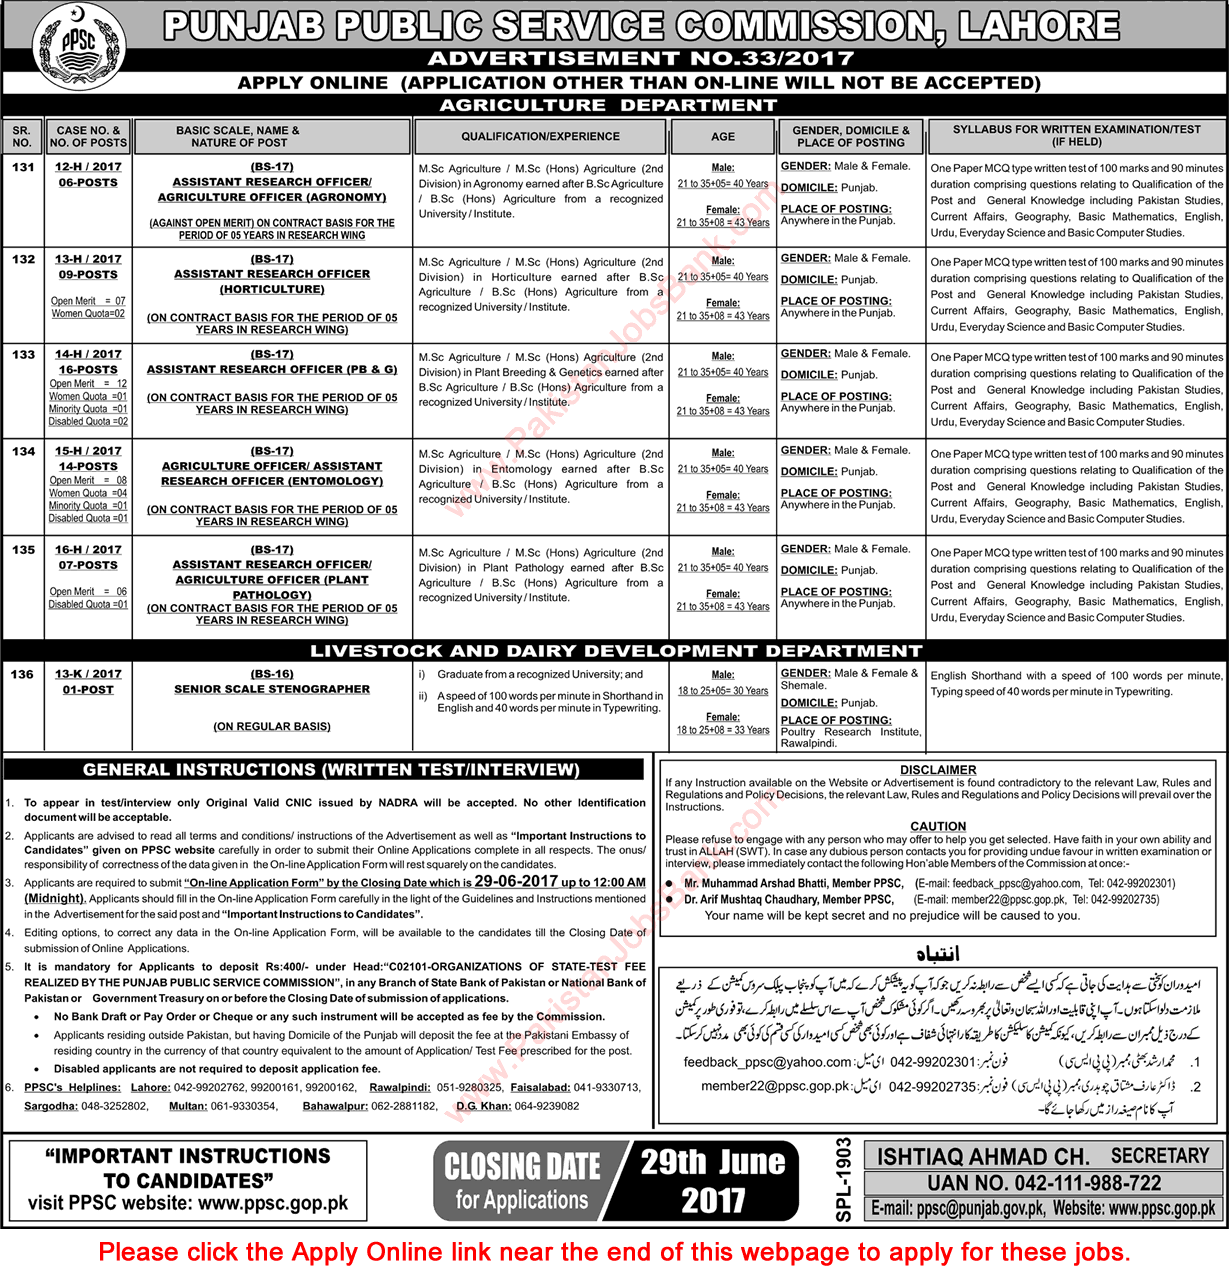 PPSC Jobs June 2017 Apply Online Consolidated Advertisement No 33/2017 Latest